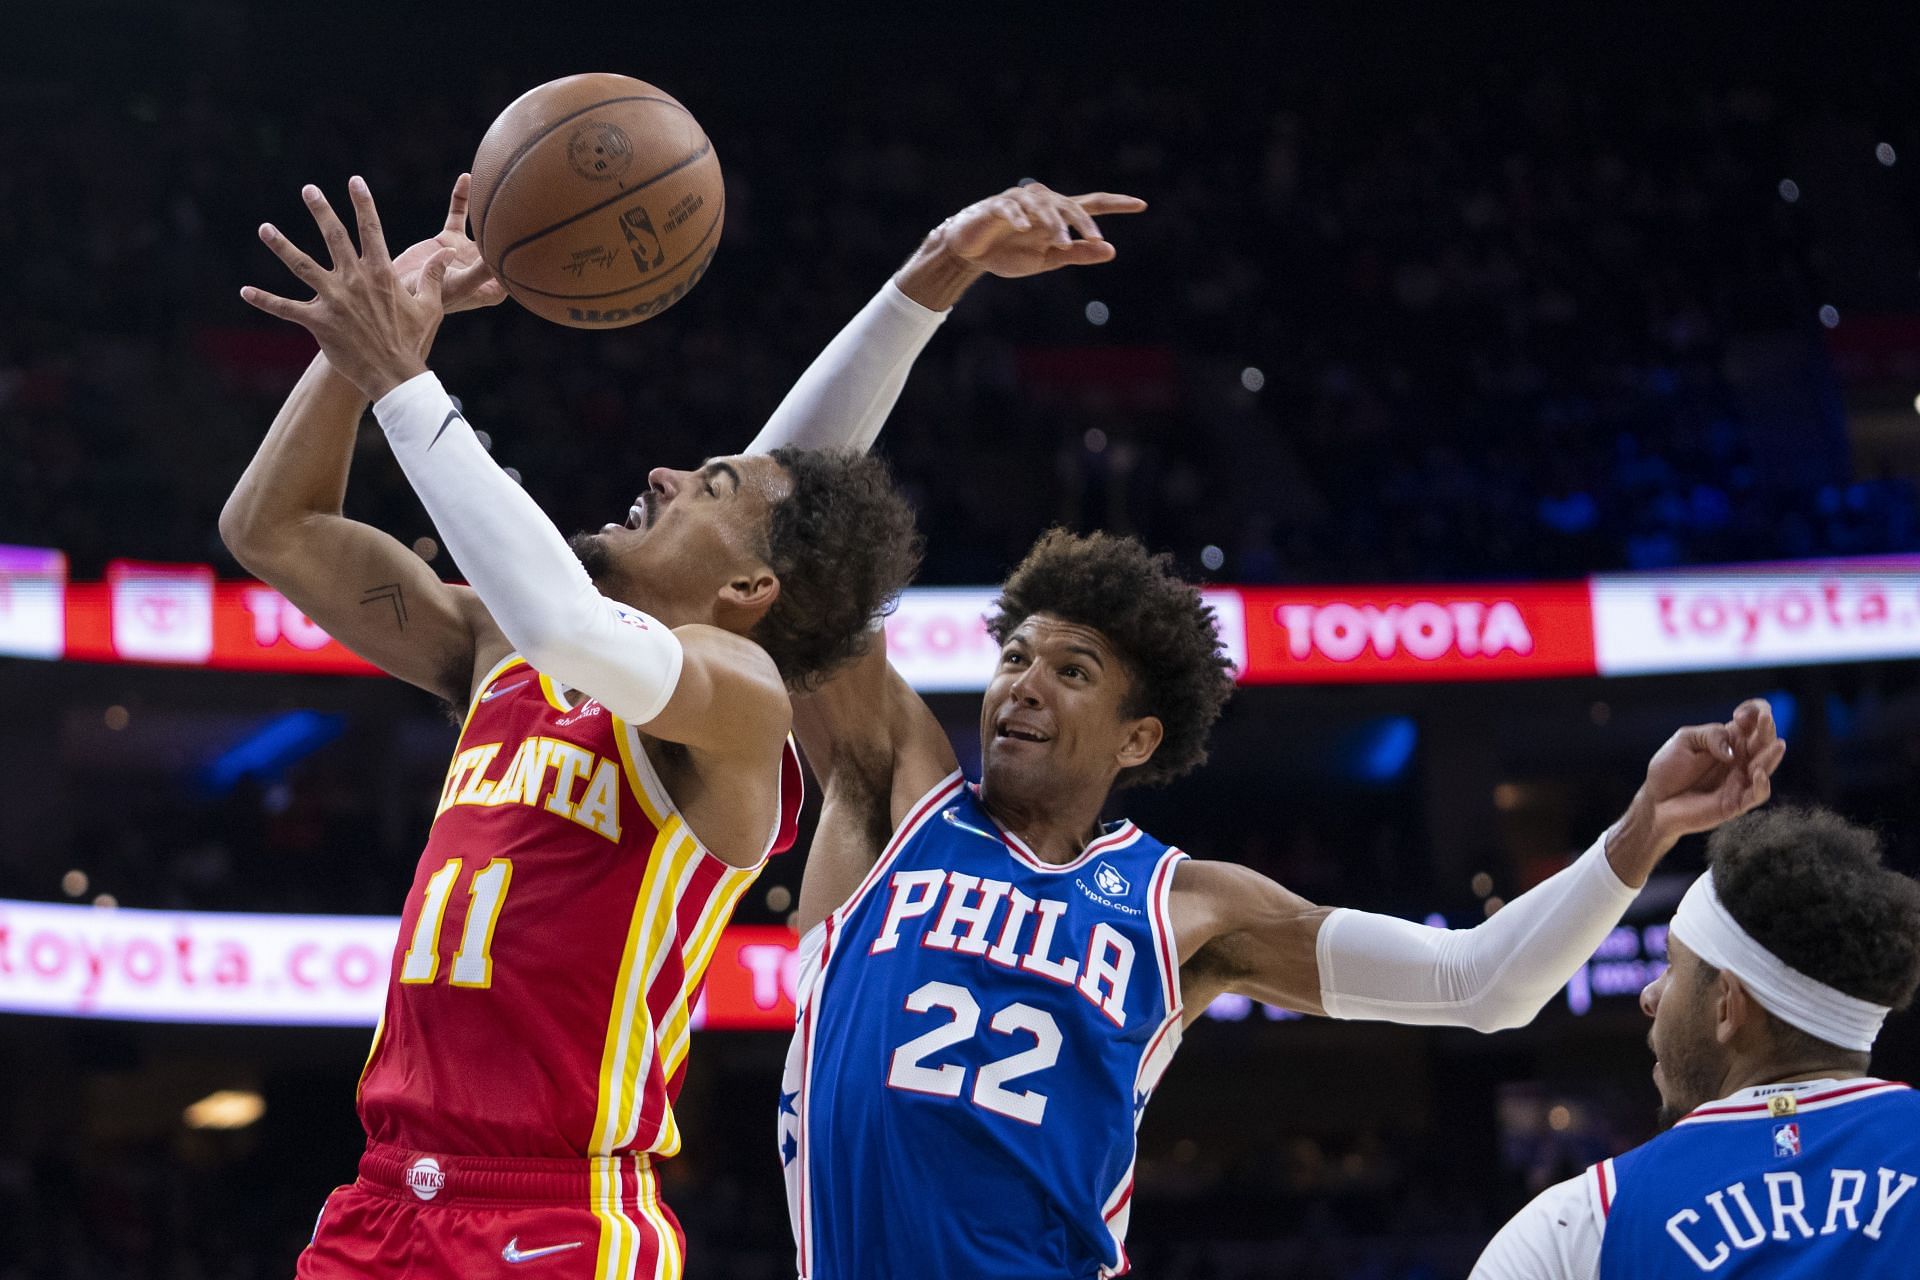 The Atlanta Hawks succumbed to a 122-94 loss against the Philadelphia 76ers in their last game